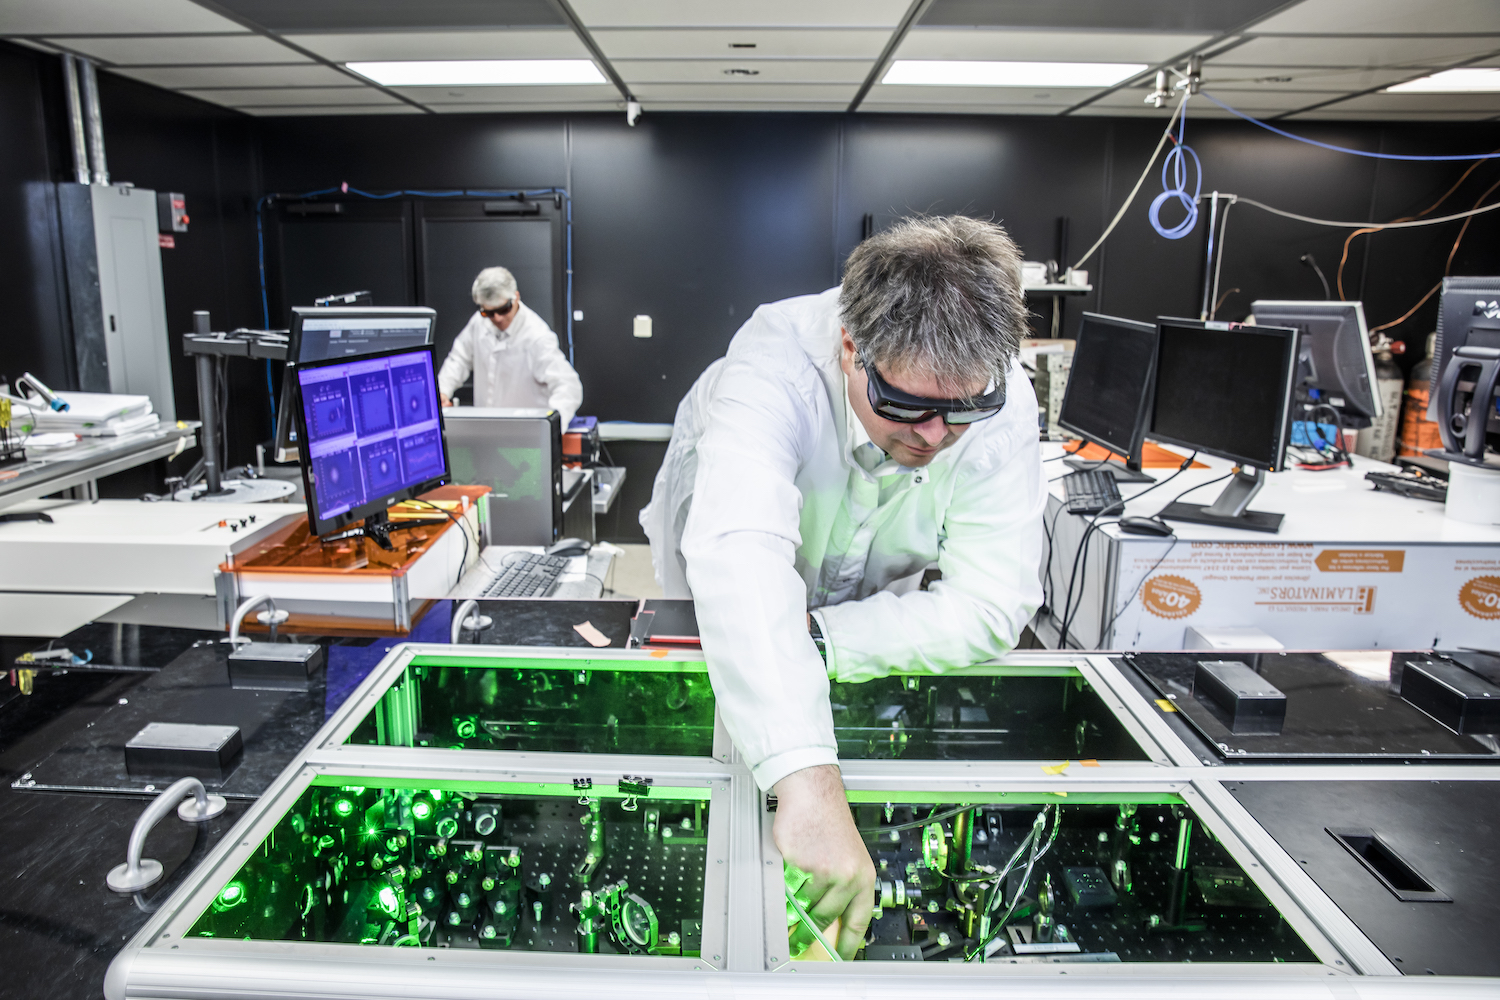 Bjorn Manuel Hegelich aligns laser beams at the University of Texas at Austin